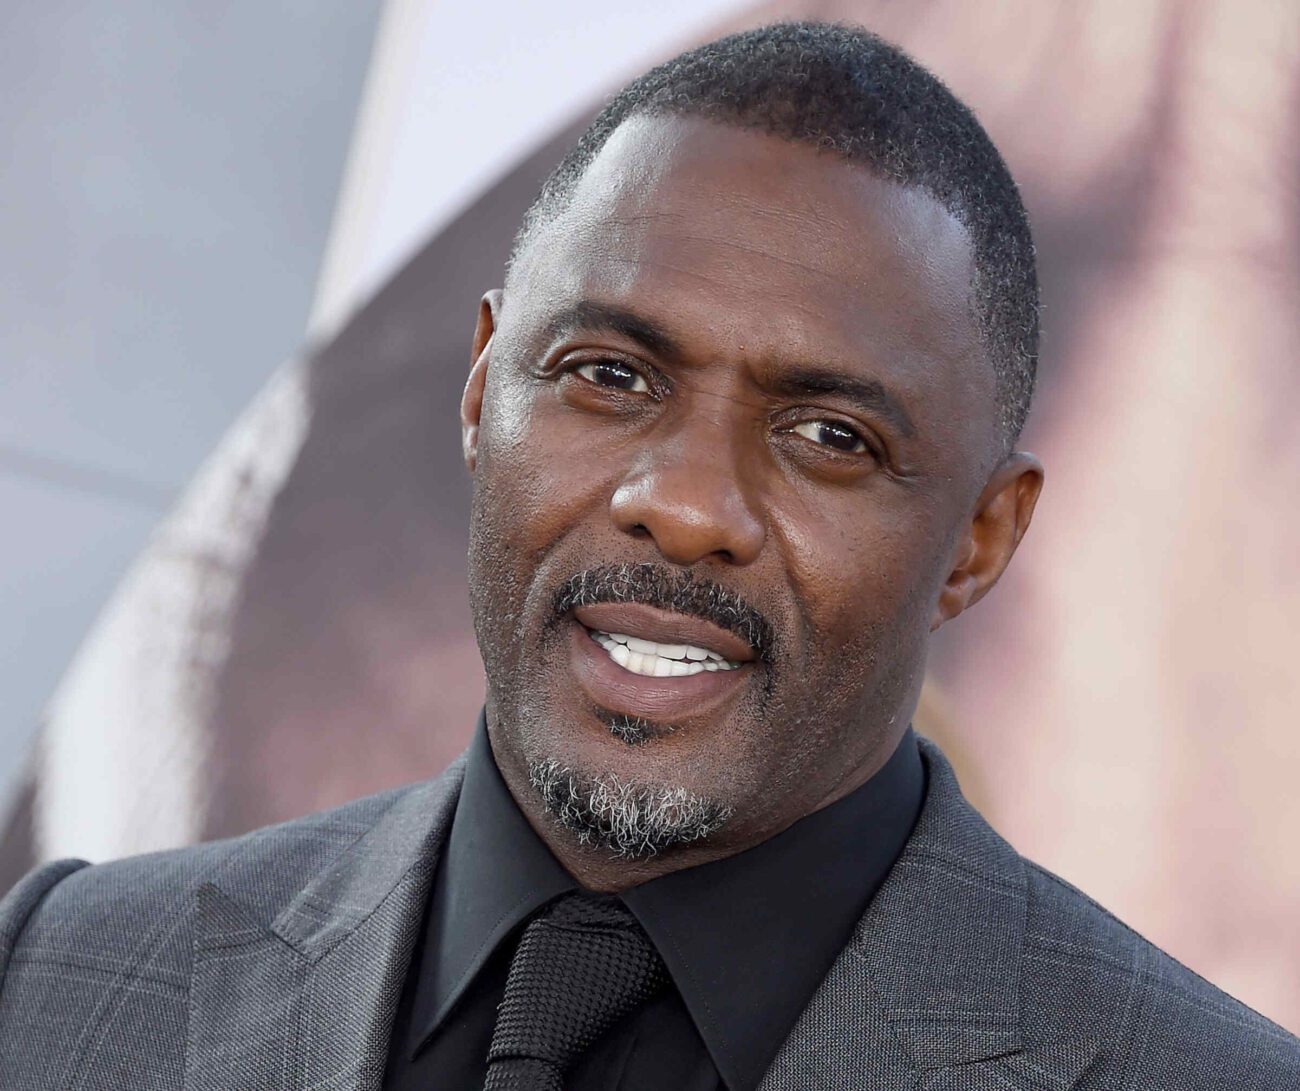 From 'The Wire' to the Marvel Cinematic Universe, Idris Elba's net worth continues to grow. Learn what's keeping this London-born actor in such high demand!